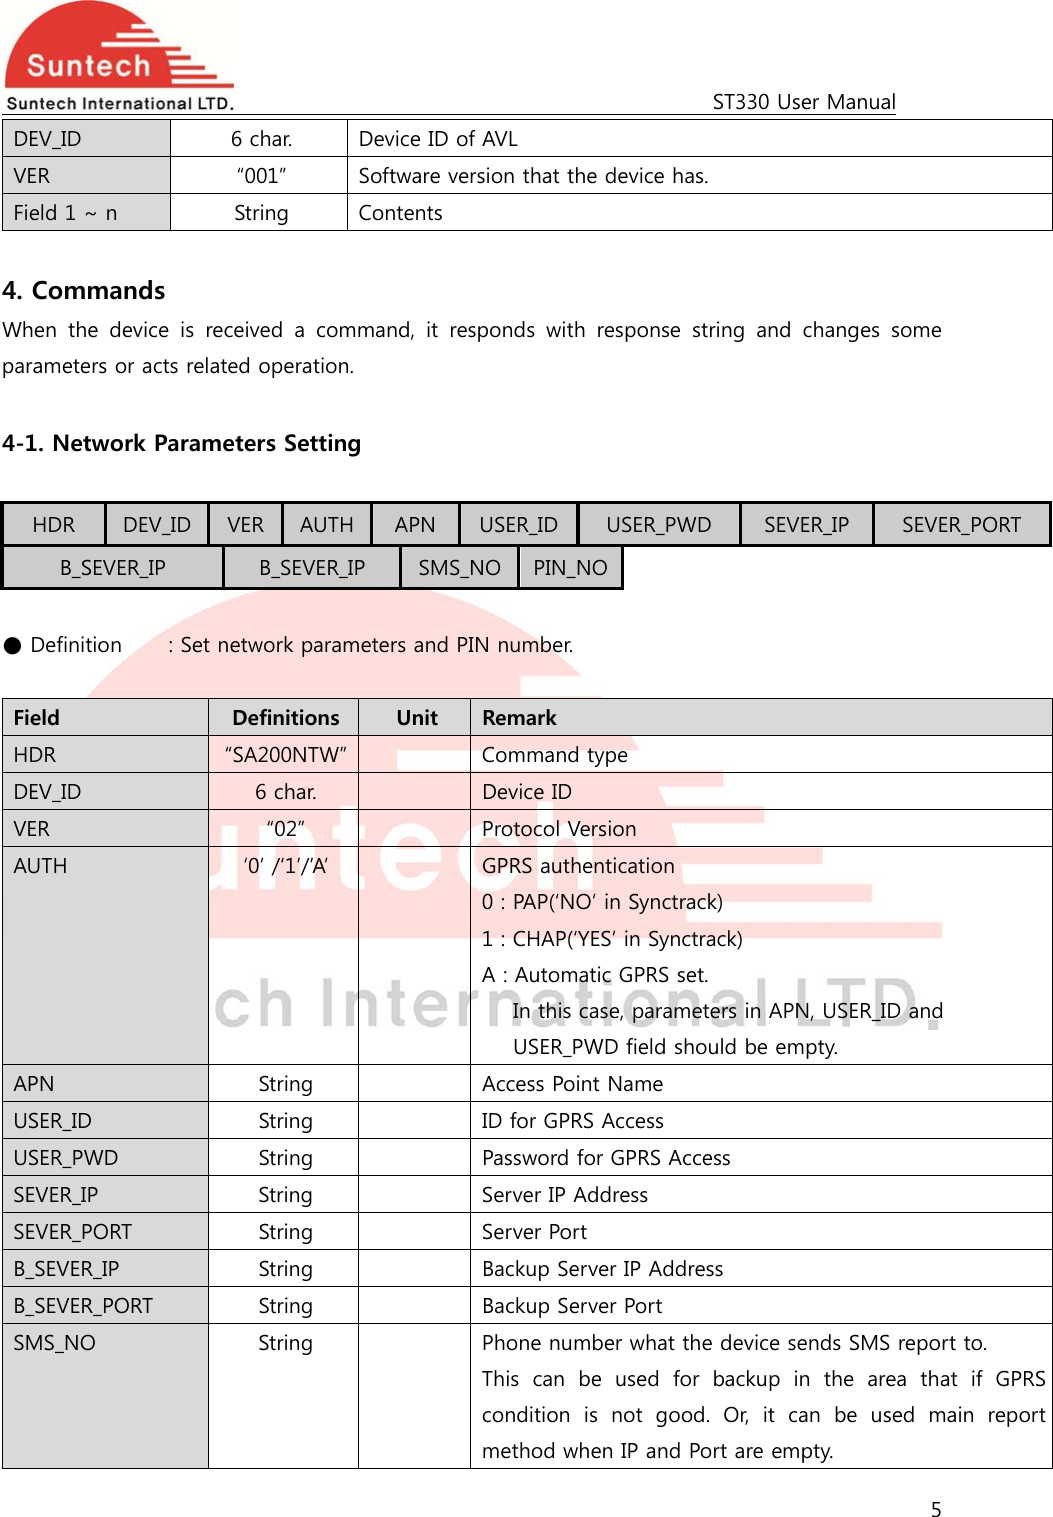                                                                                             ST330 User Manual 5  DEV_ID  6 char.  Device ID of AVL VER  “001”  Software version that the device has. Field 1 ~ n  String  Contents  4. Commands When  the  device  is  received  a  command,  it  responds  with  response  string  and  changes  some parameters or acts related operation.  4-1. Network Parameters Setting  HDR  DEV_ID  VER  AUTH  APN  USER_ID USER_PWD  SEVER_IP  SEVER_PORT B_SEVER_IP  B_SEVER_IP  SMS_NO PIN_NO ● Definition   : Set network parameters and PIN number.  Field  Definitions  Unit  Remark HDR  “SA200NTW”    Command type DEV_ID  6 char.    Device ID VER  “02”    Protocol Version AUTH  ‘0’ /‘1’/’A’    GPRS authentication 0 : PAP(‘NO’ in Synctrack) 1 : CHAP(‘YES’ in Synctrack) A : Automatic GPRS set.  In this case, parameters in APN, USER_ID and   USER_PWD field should be empty. APN  String    Access Point Name USER_ID  String    ID for GPRS Access USER_PWD  String    Password for GPRS Access SEVER_IP  String    Server IP Address SEVER_PORT  String    Server Port B_SEVER_IP  String    Backup Server IP Address B_SEVER_PORT  String    Backup Server Port SMS_NO  String    Phone number what the device sends SMS report to. This can be used for backup in the area that if GPRS condition  is  not  good.  Or,  it  can  be  used  main  report method when IP and Port are empty. 